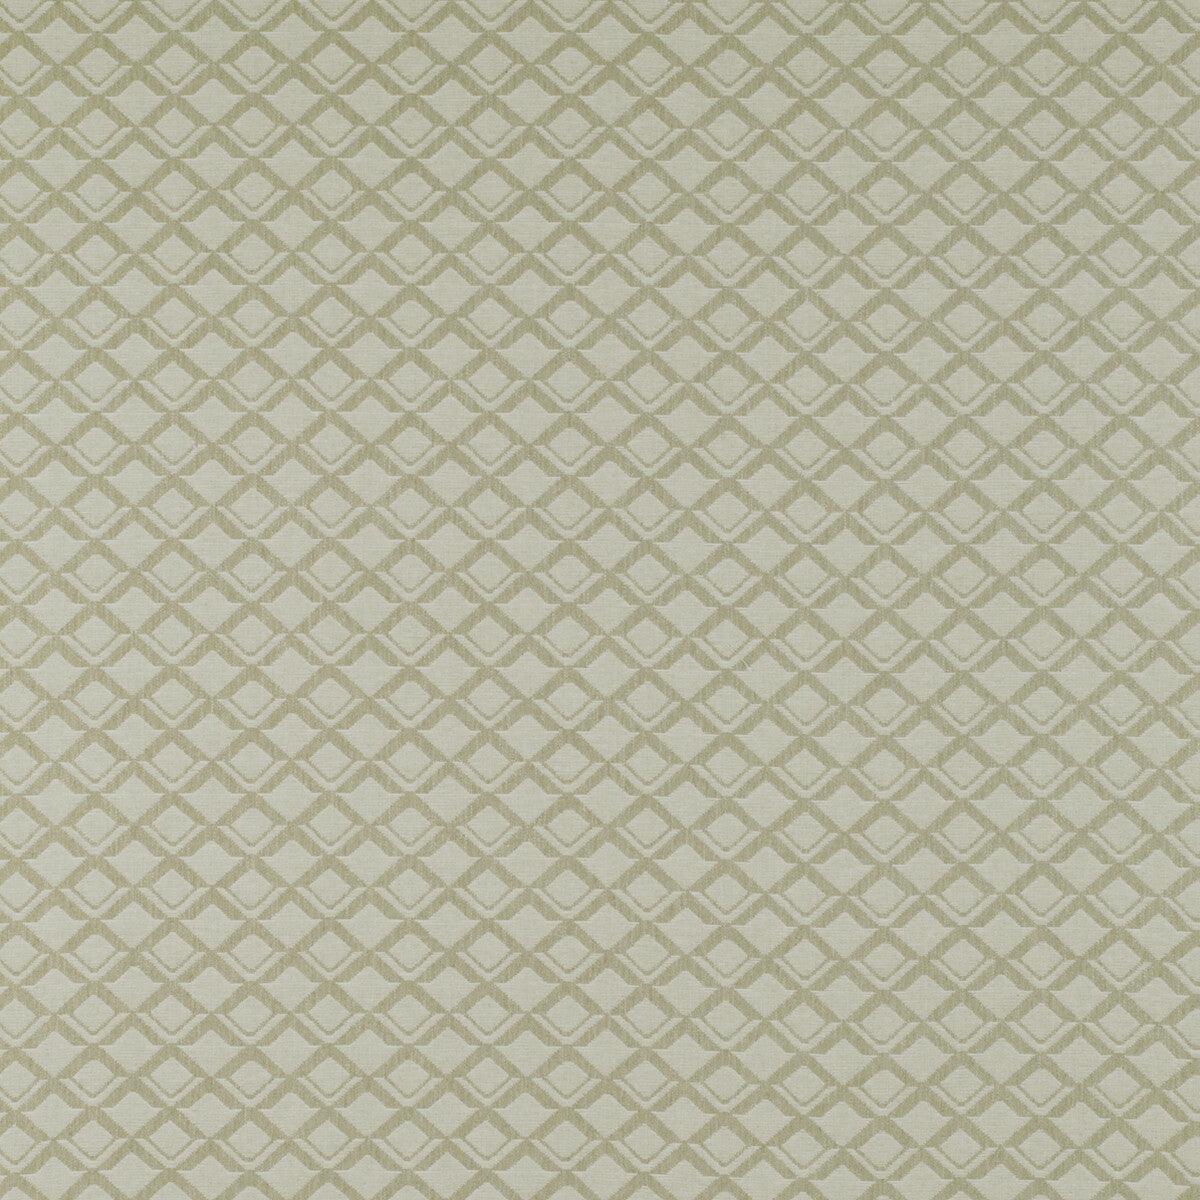 Lodi fabric in blanco color - pattern GDT5324.003.0 - by Gaston y Daniela in the Tierras collection